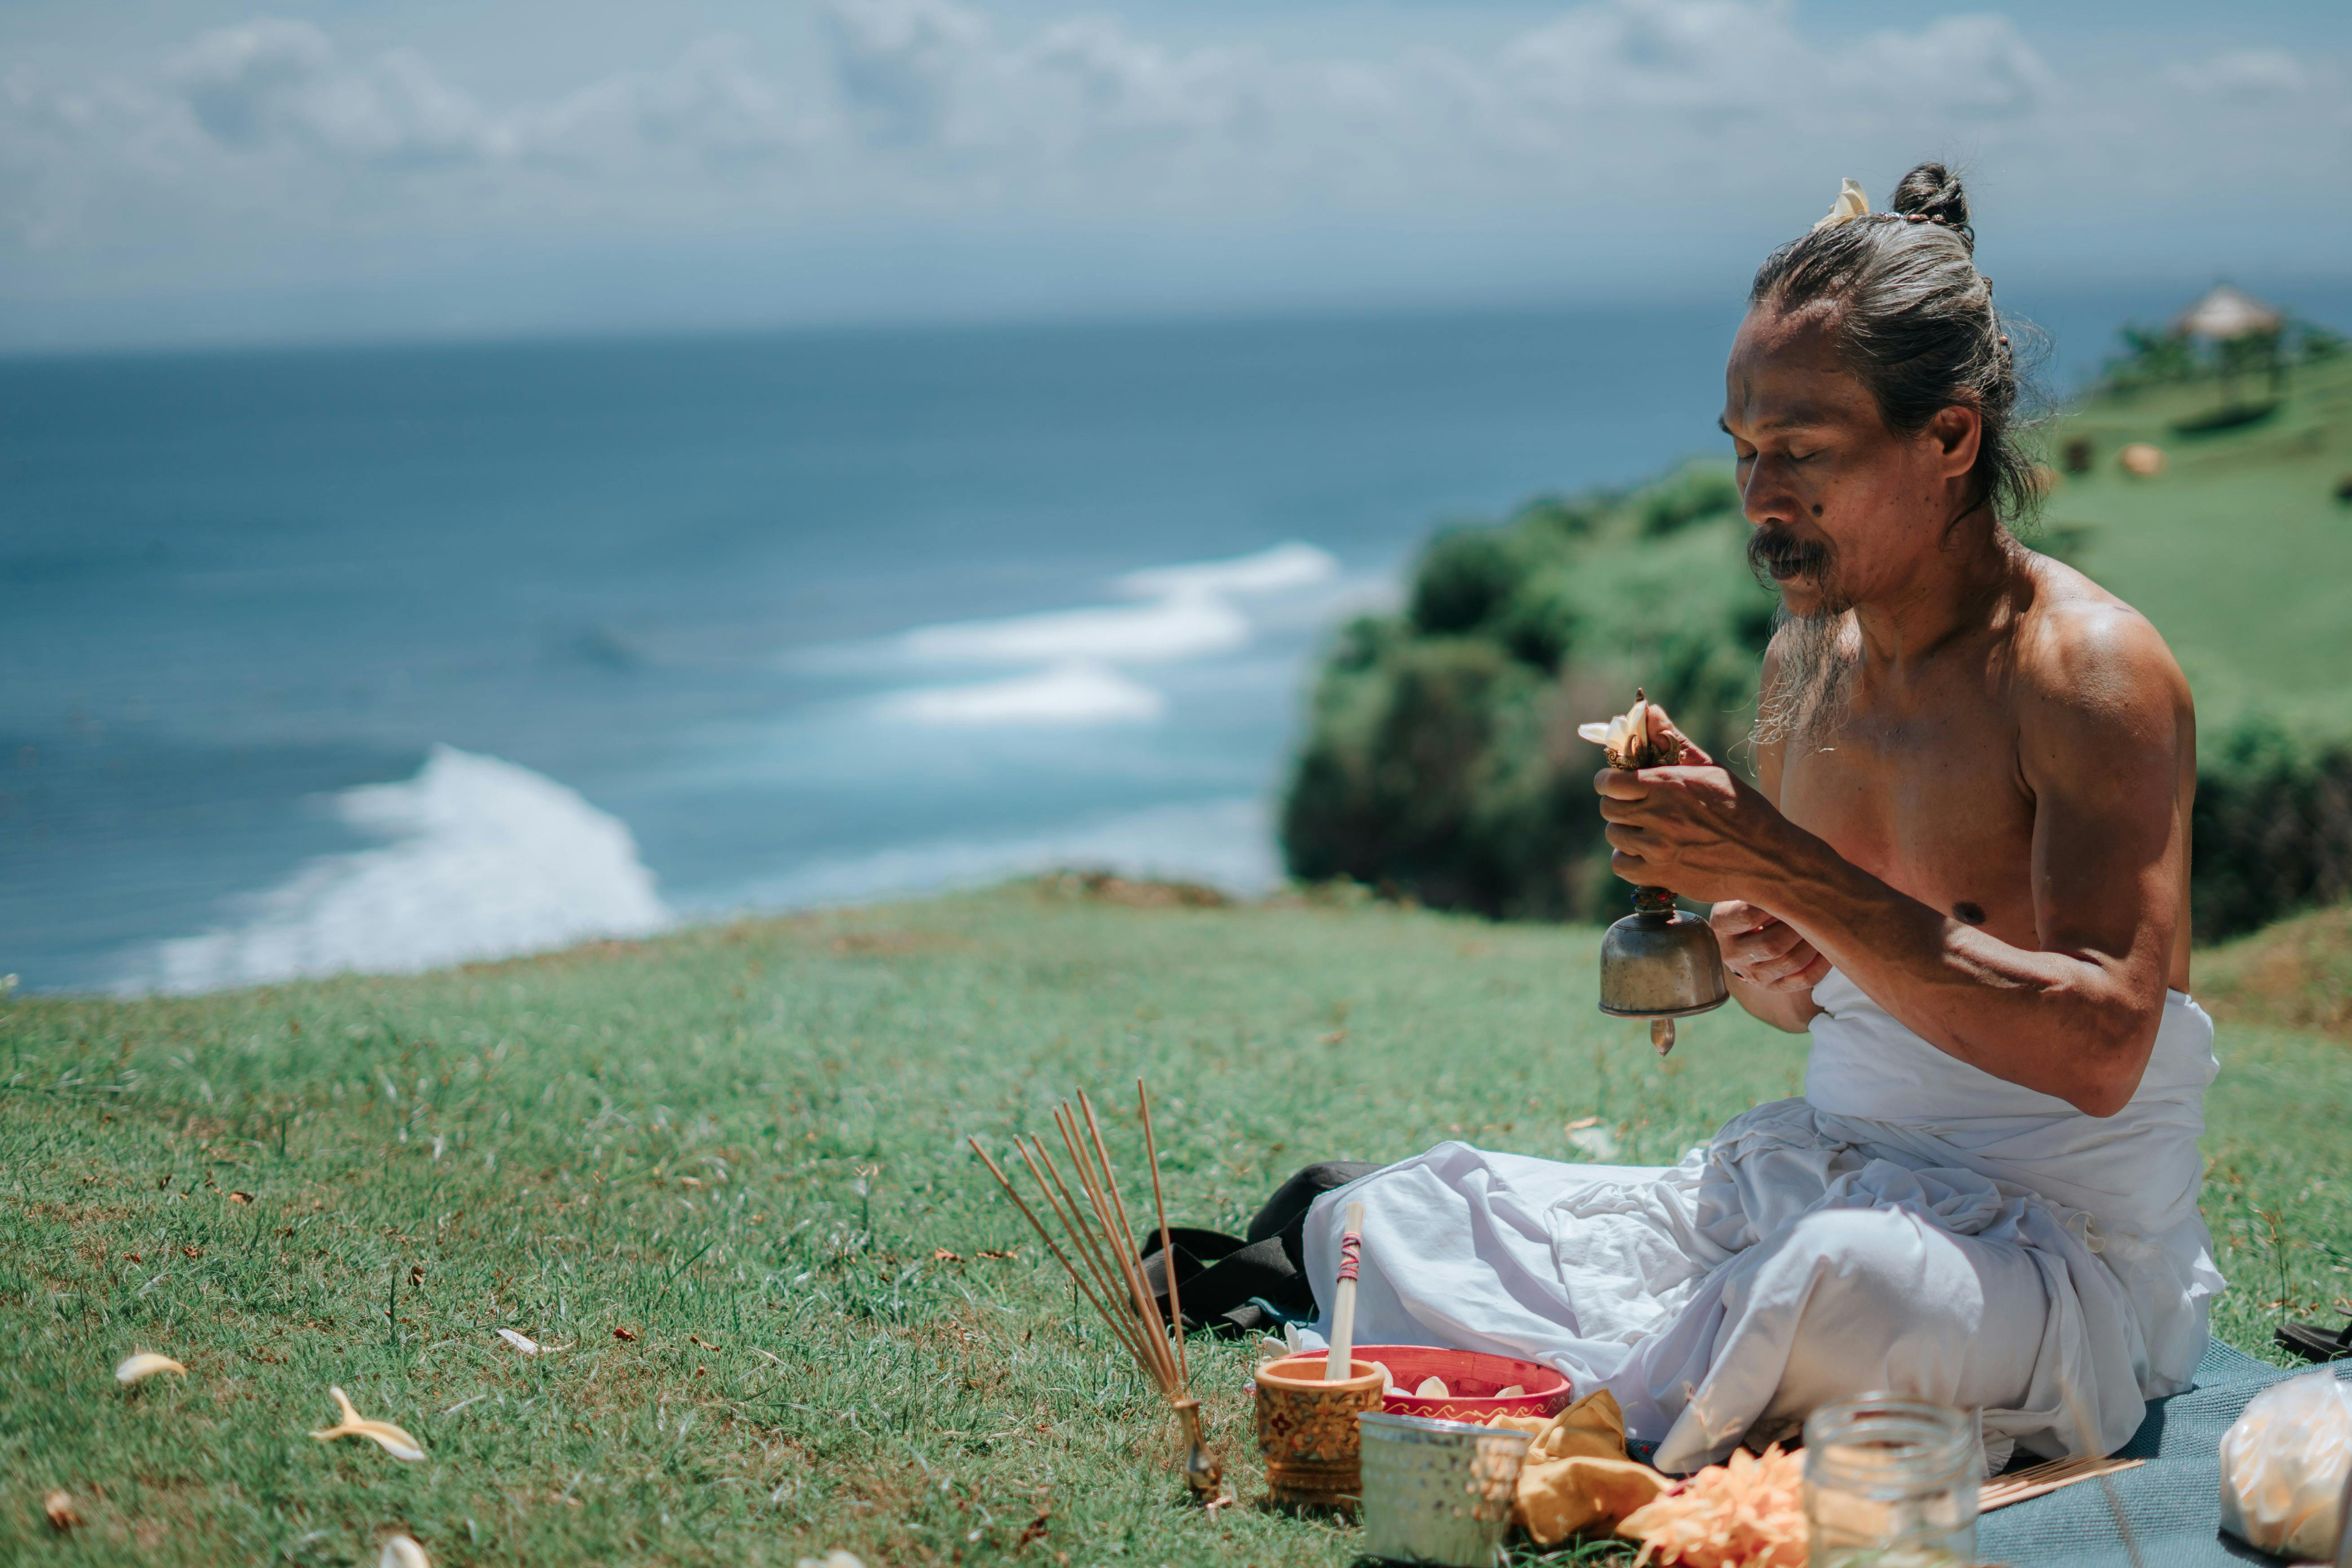 Jero Mangku is one of the most respected healers in Bali